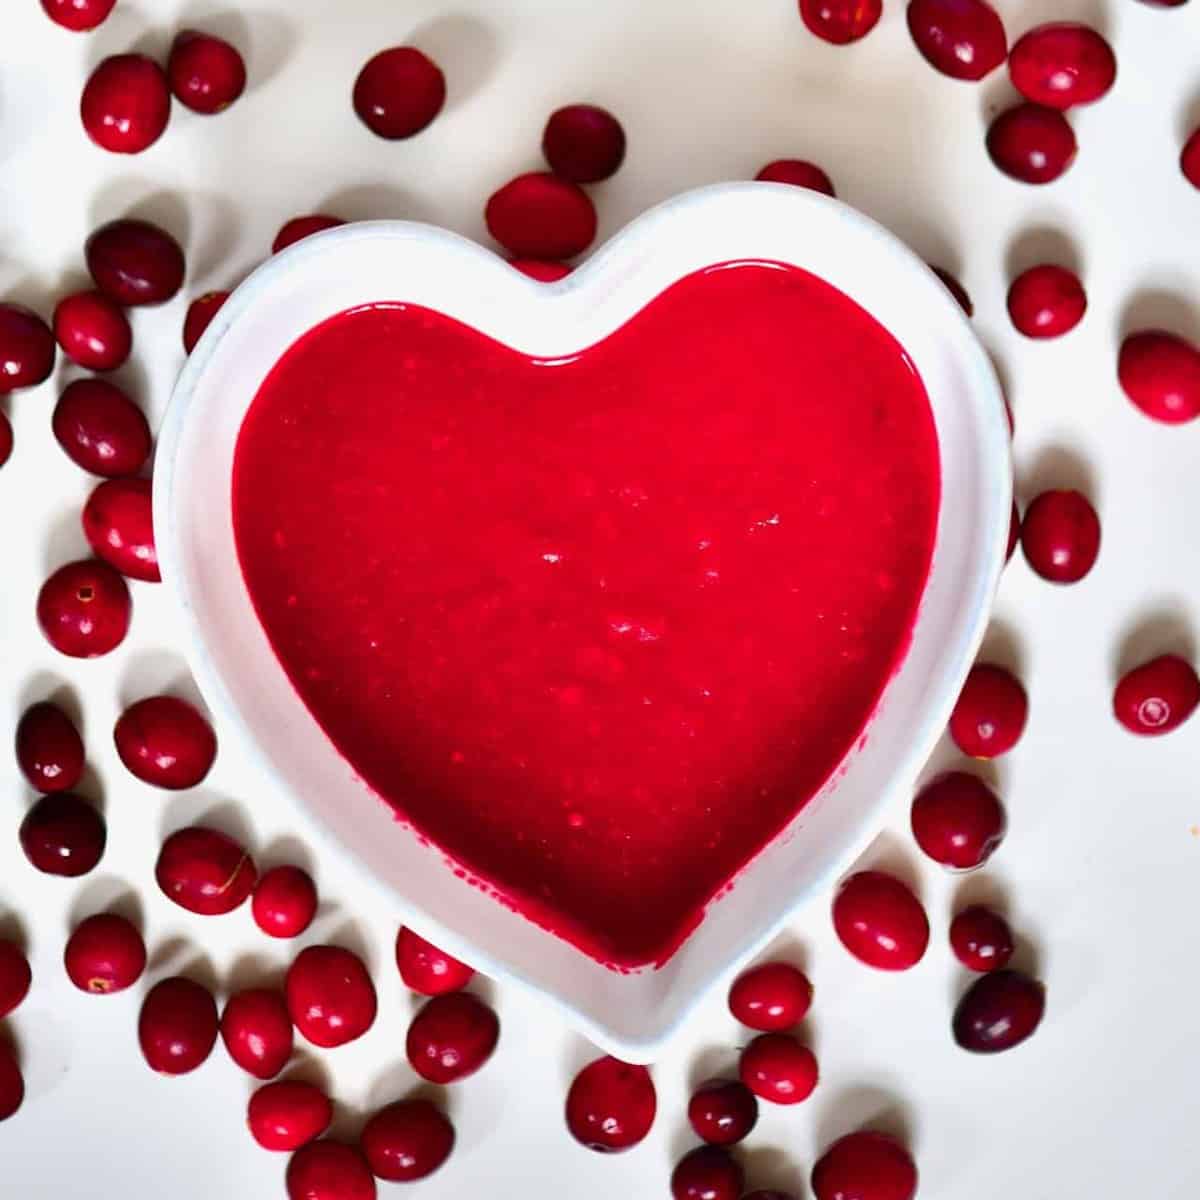 A heart-shaped bowl with cranberry sauce and cranberries around it on a white flat surface 